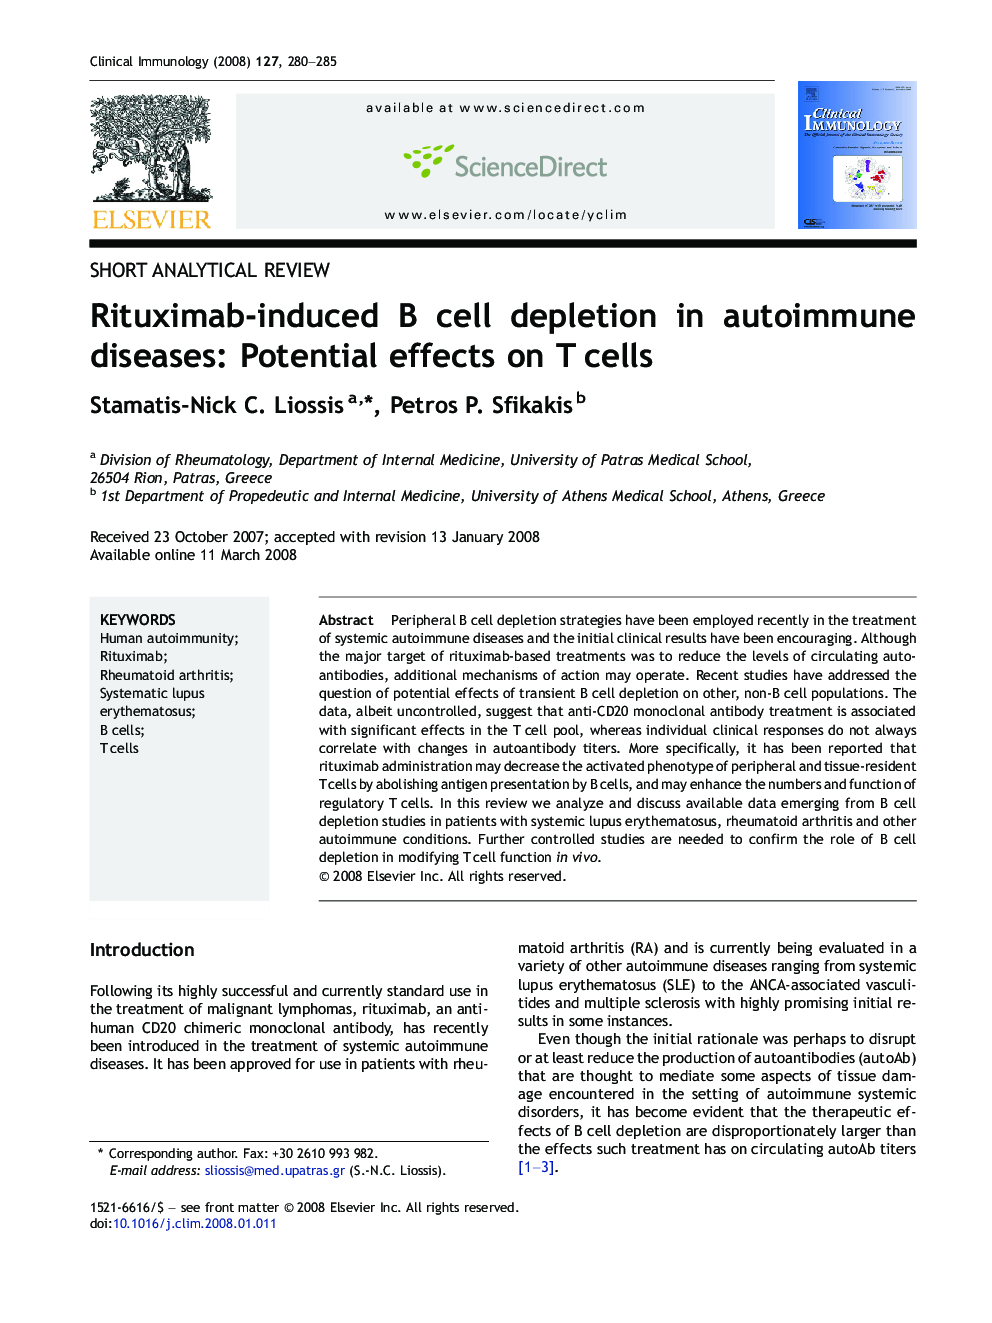 Rituximab-induced B cell depletion in autoimmune diseases: Potential effects on T cells